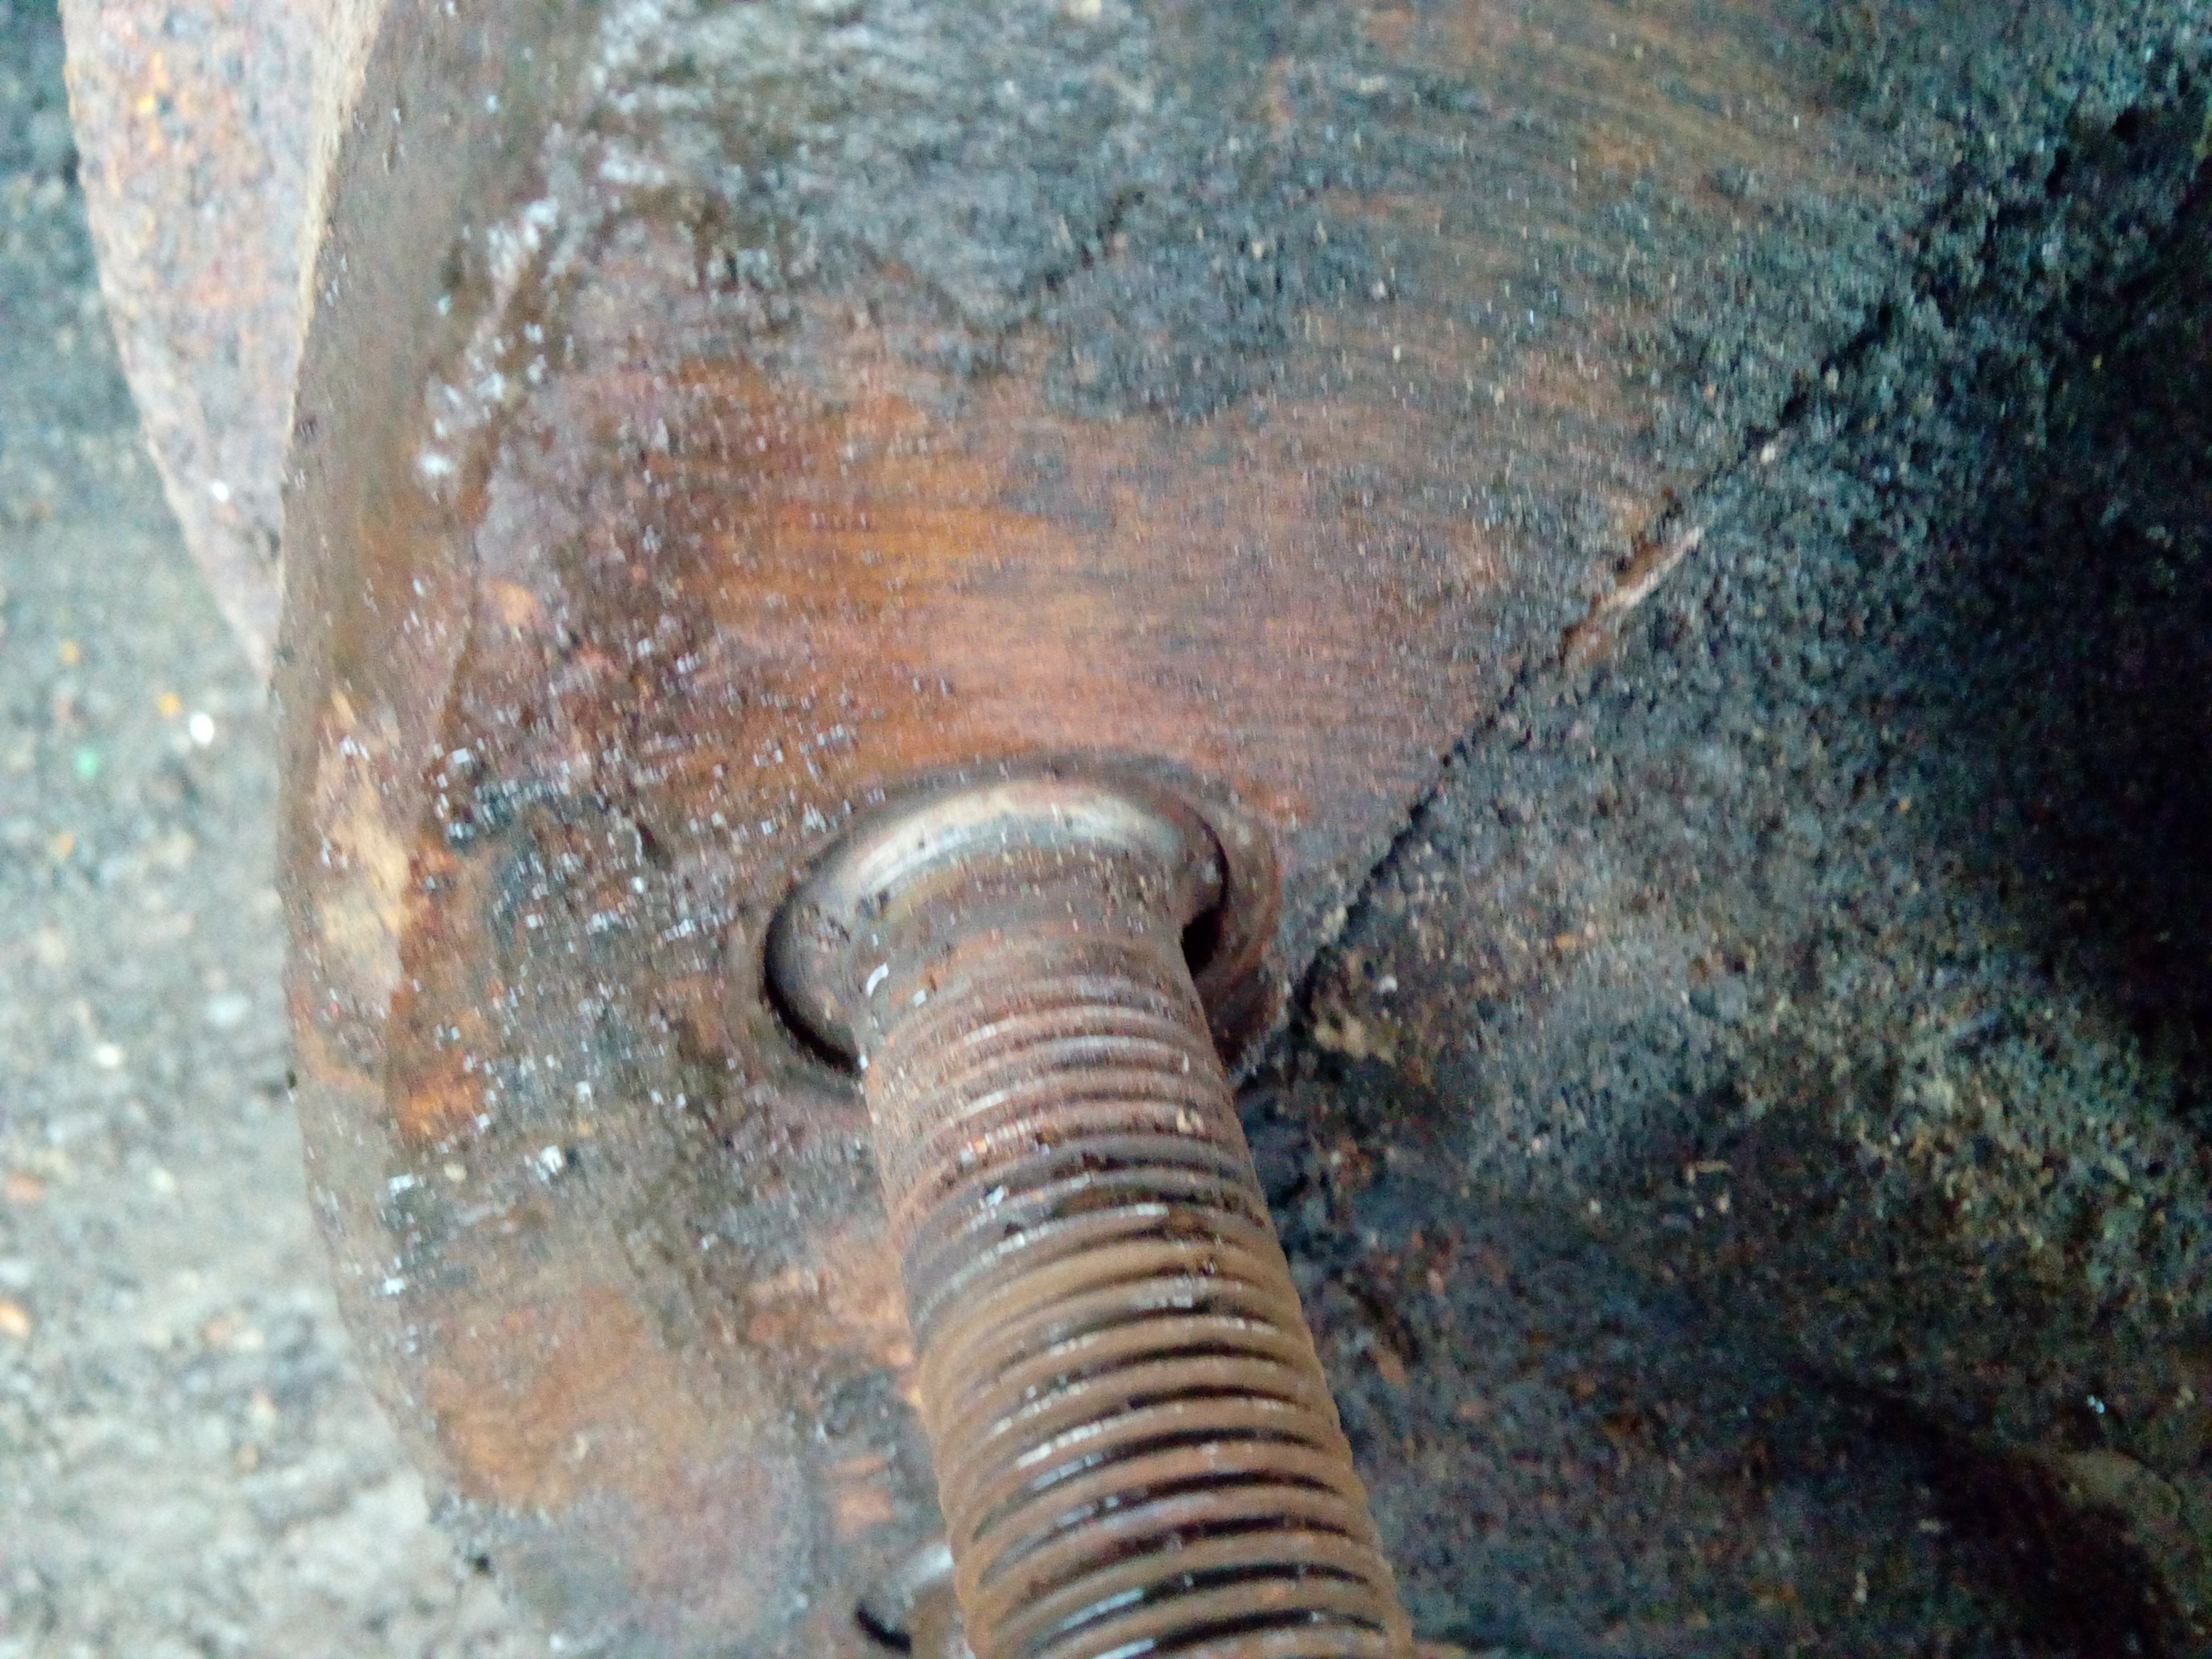 Another close-up of a wheel-stud passing through a brake
drum. The drum has been inched off a little bit!